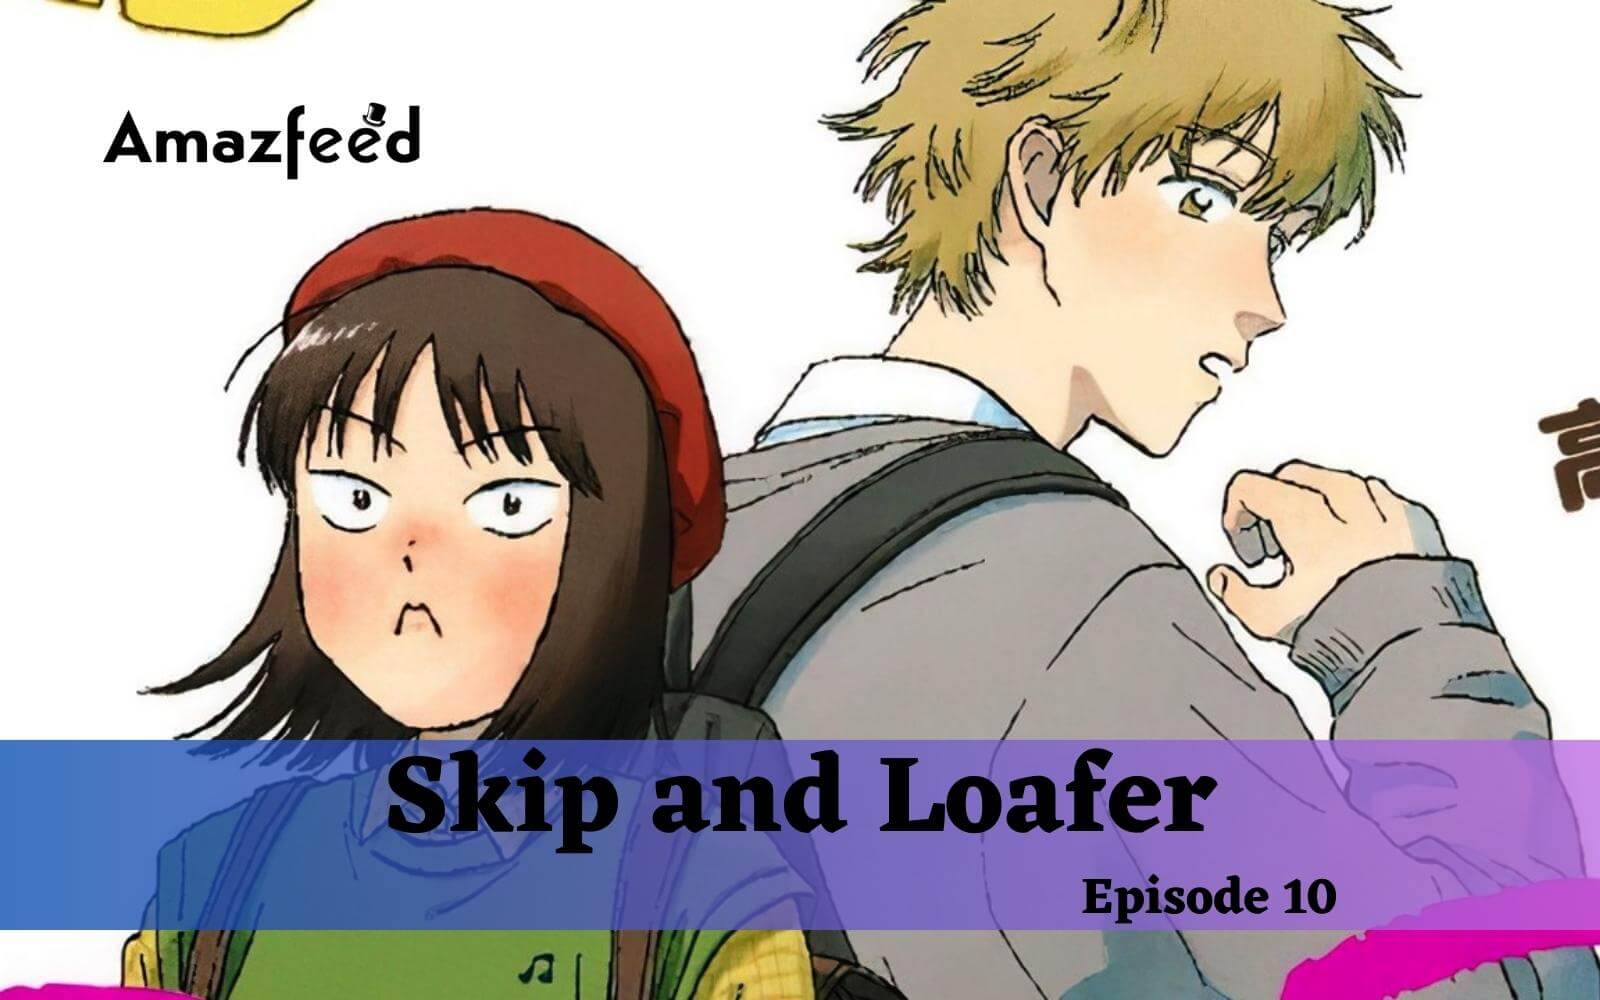 Skip and Loafer episode 1 wins fans over with relatable and